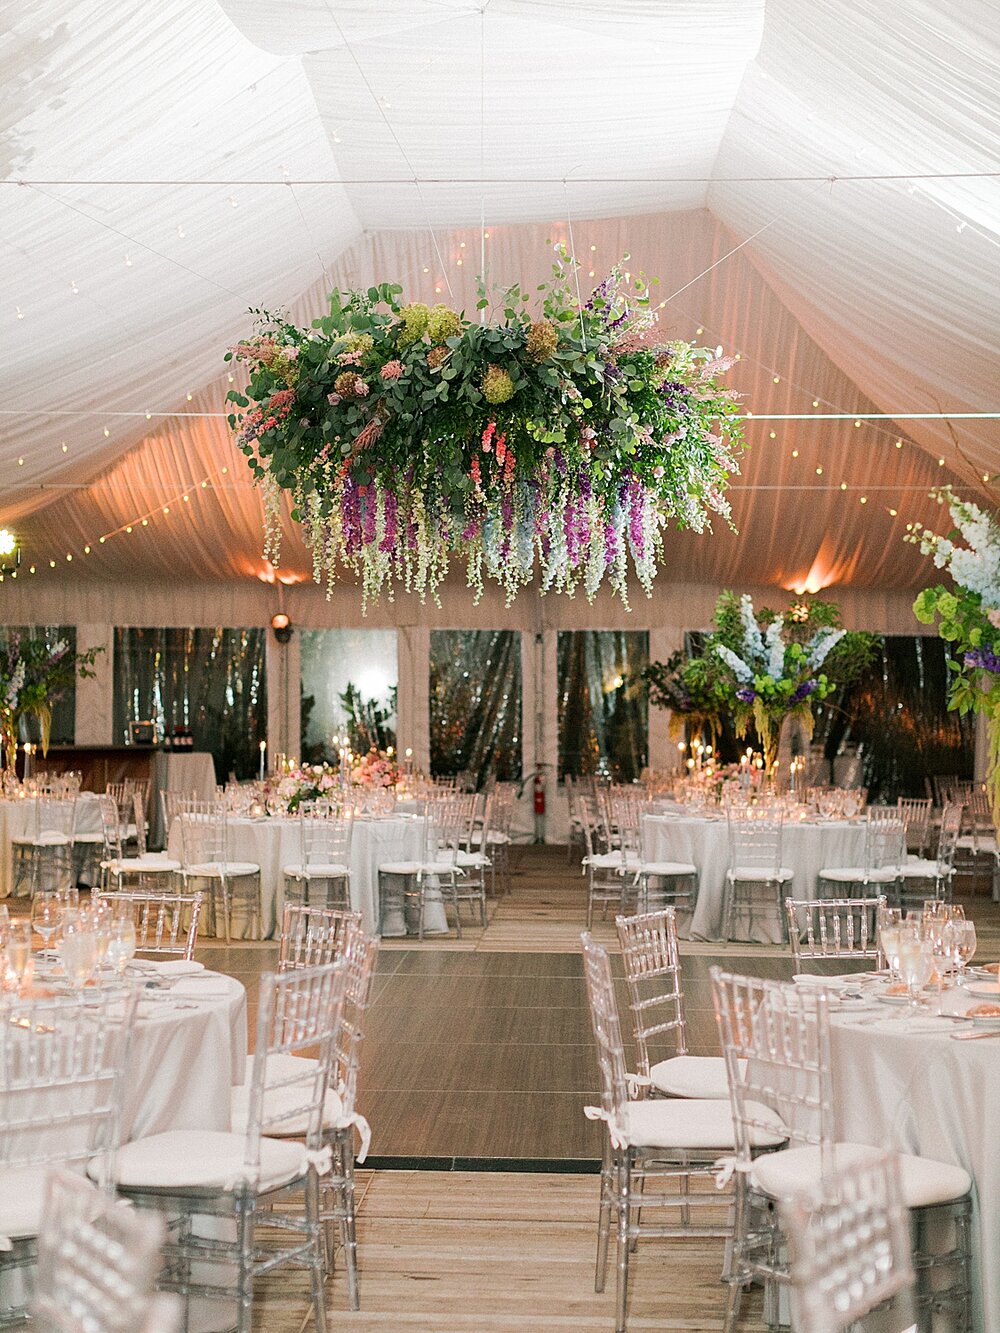 tented wedding reception with floral hanging | Tri-State Area Wedding Venues photographed by NY wedding photographer Asher Gardner Photography